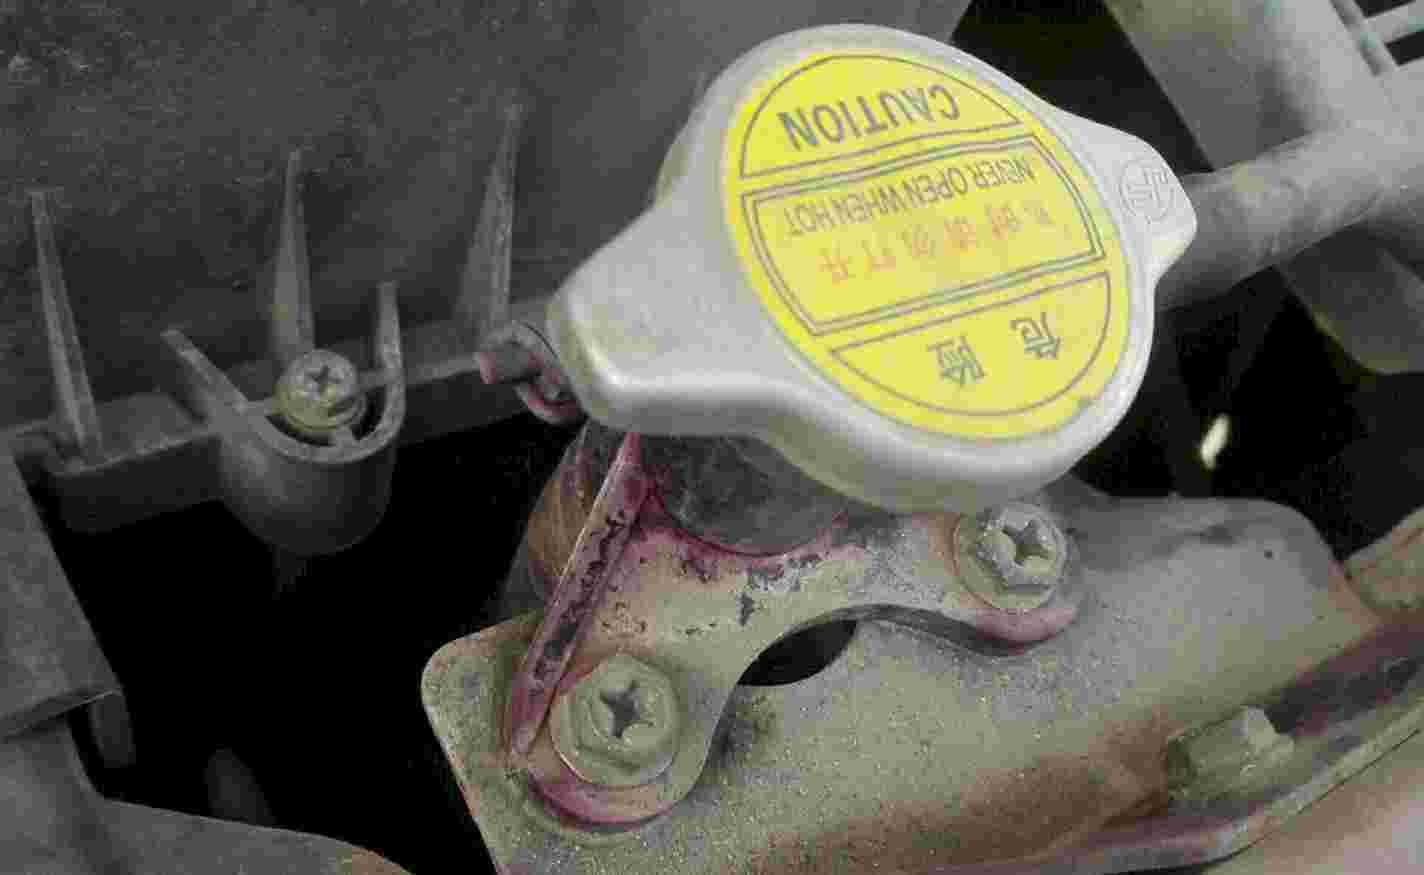 Bad Radiator Cap Symptoms, Test and Replacement Cost